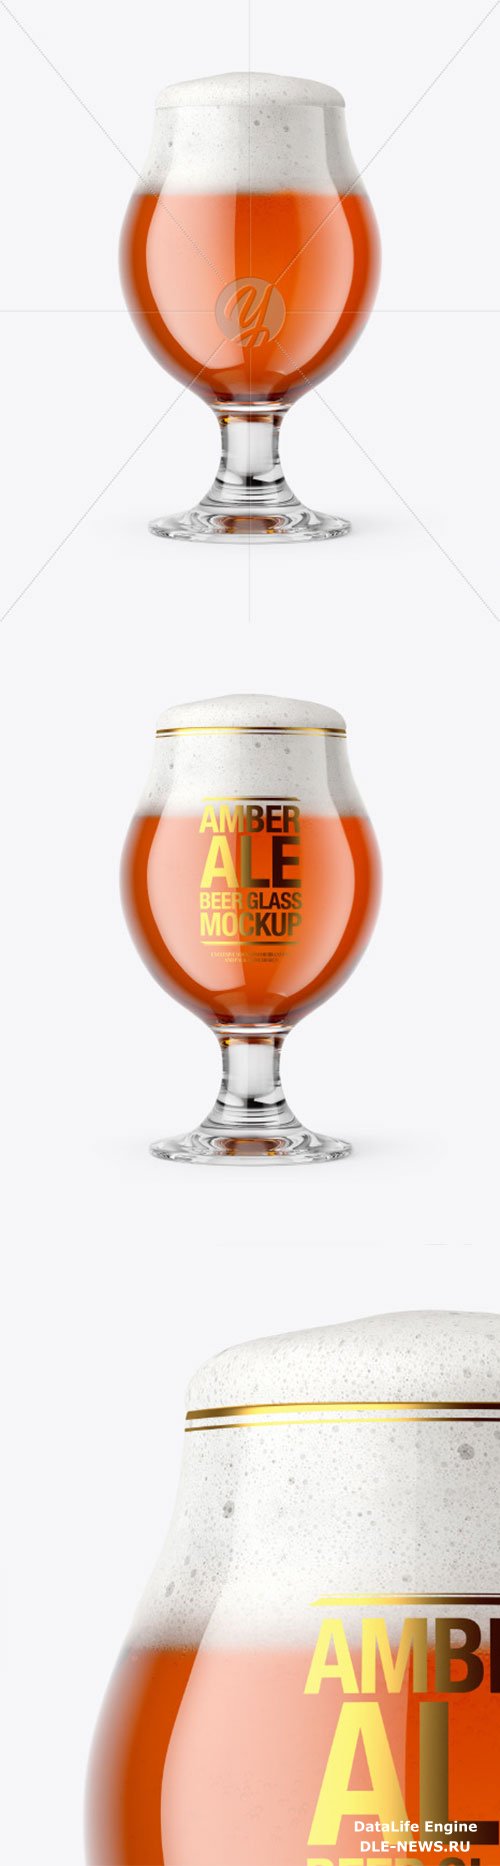 Tulip Glass With Amber Ale Beer Mockup 86481